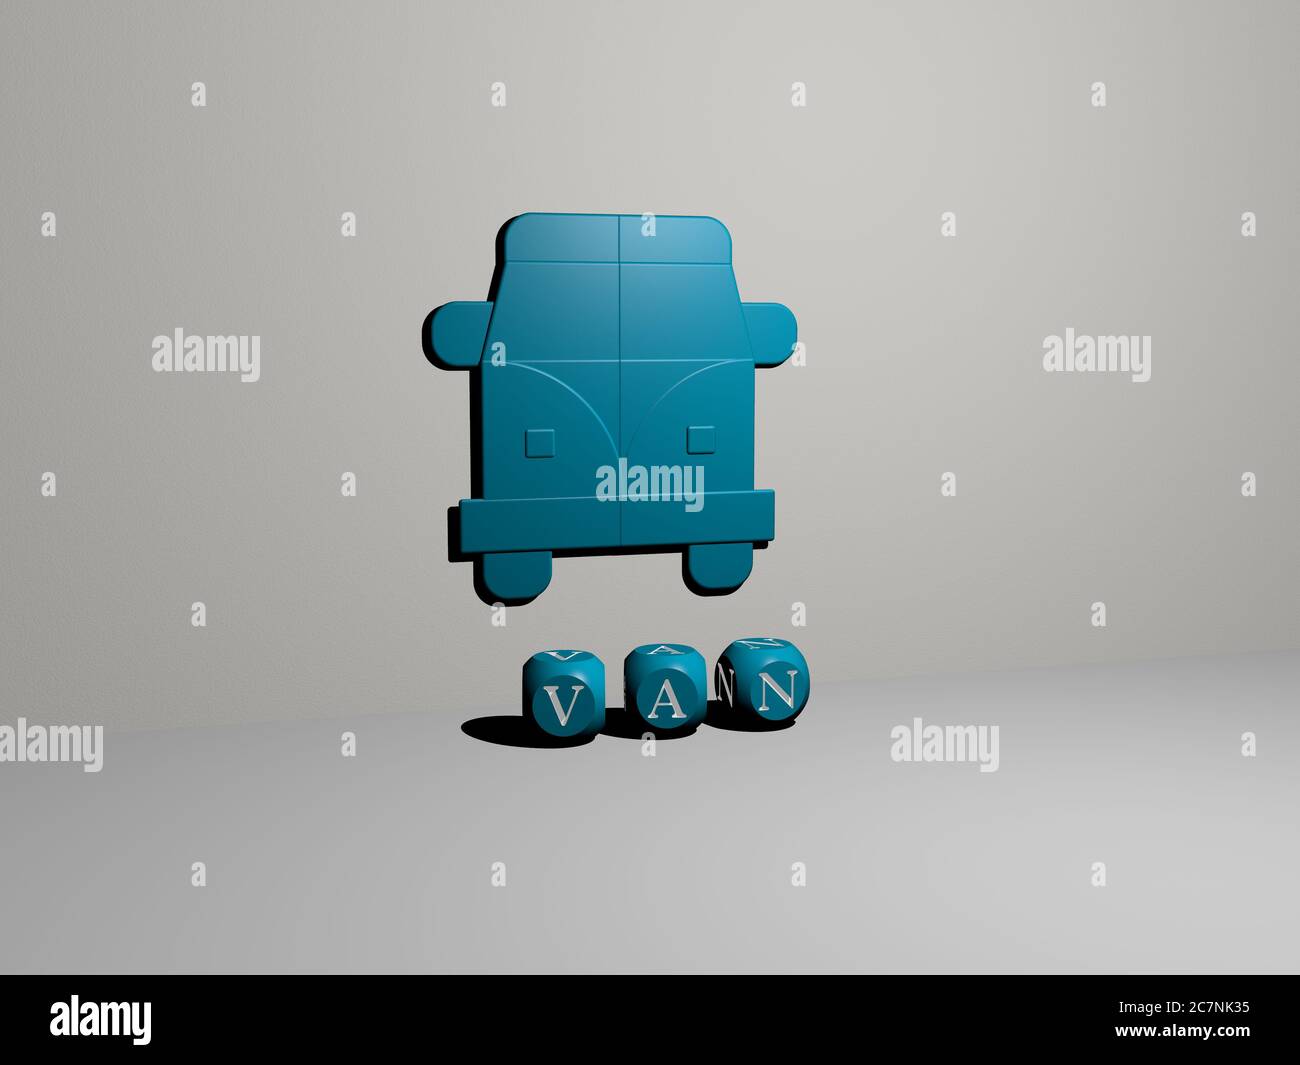 3D illustration of van graphics and text made by metallic dice letters for the related meanings of the concept and presentations. car and editorial Stock Photo